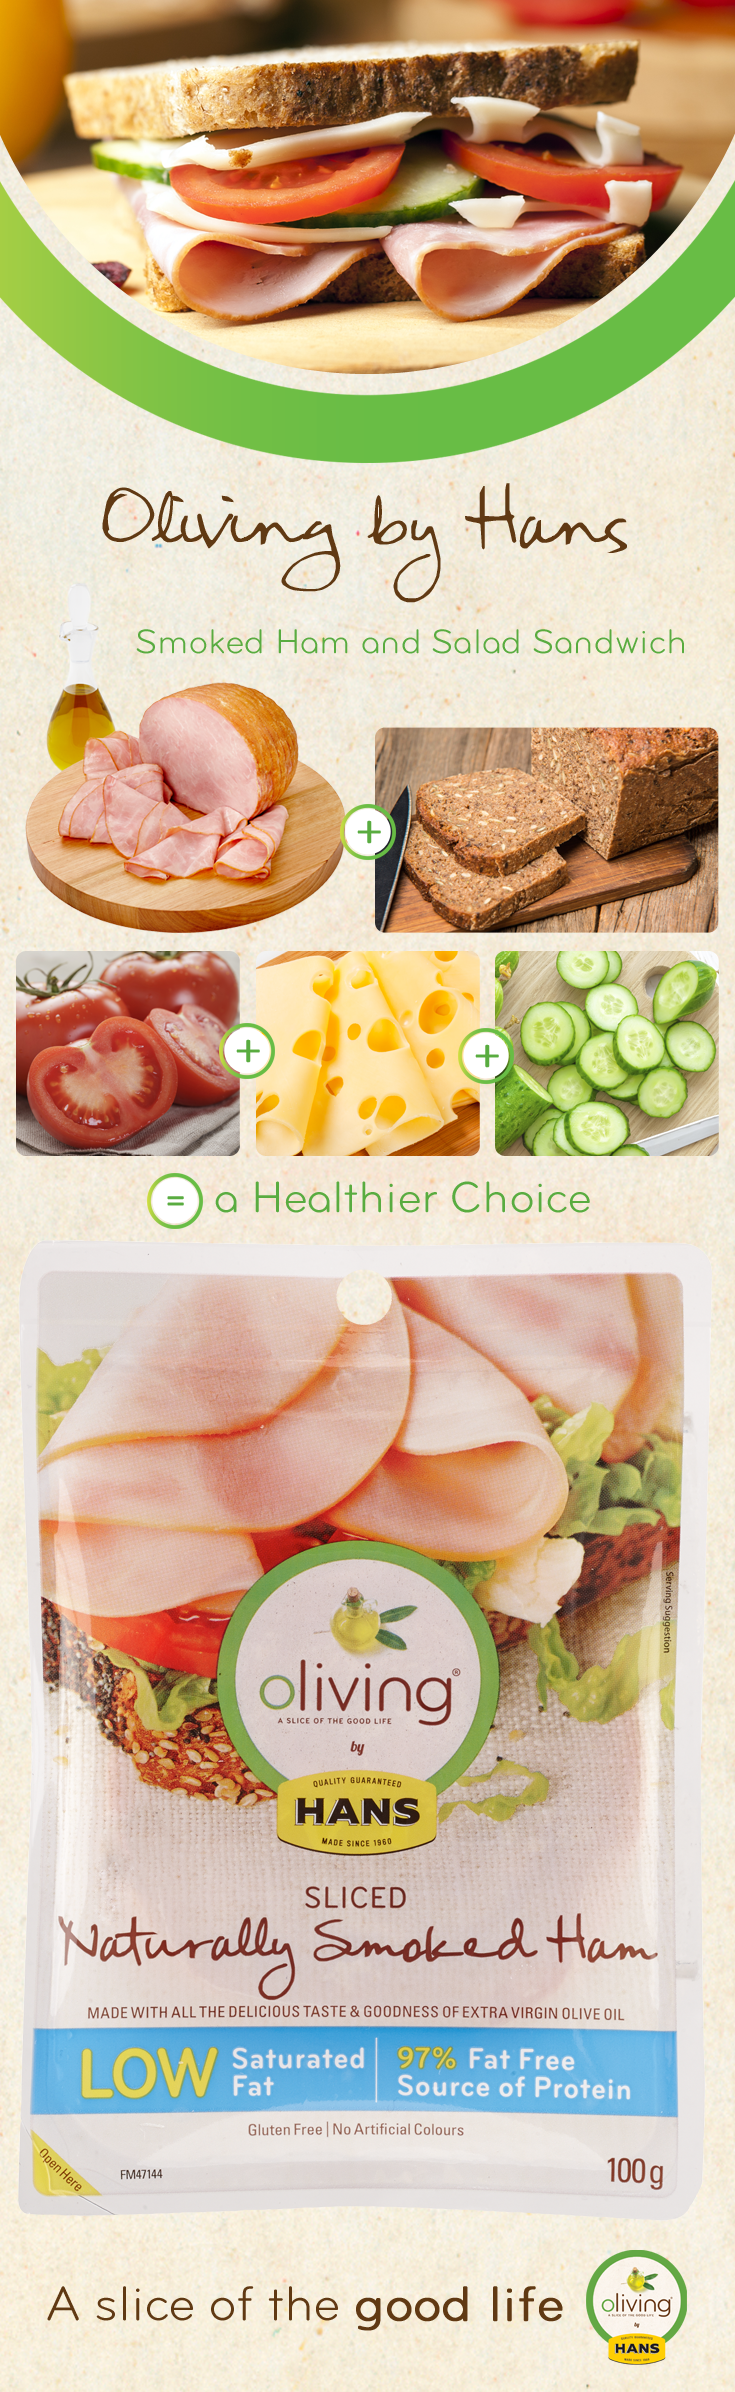 Oliving by Hans: Smoked Ham Sandwich